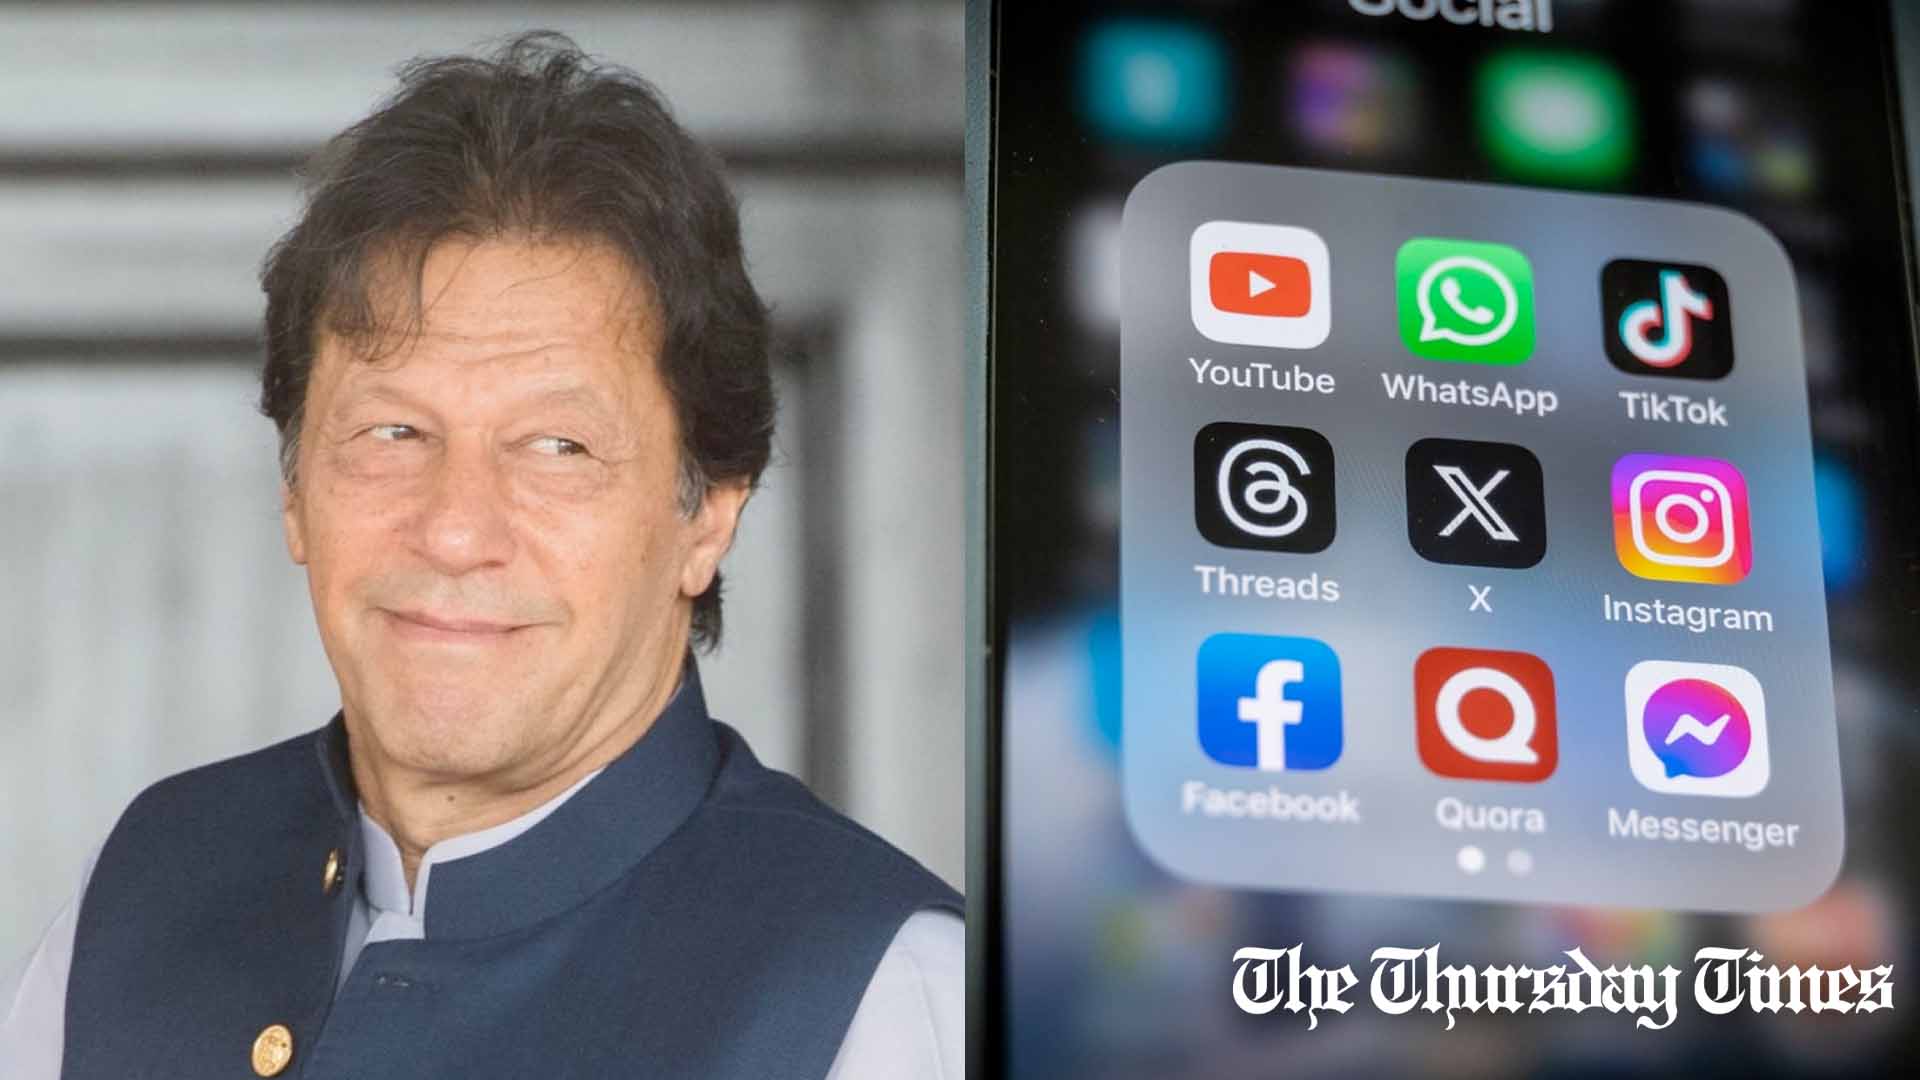 A combined file photo is shown of former Pakistani prime minister Imran Khan at Islamabad on October 15, 2019 (L) and a range of social media apps (R). — FILE/THE THURSDAY TIMES